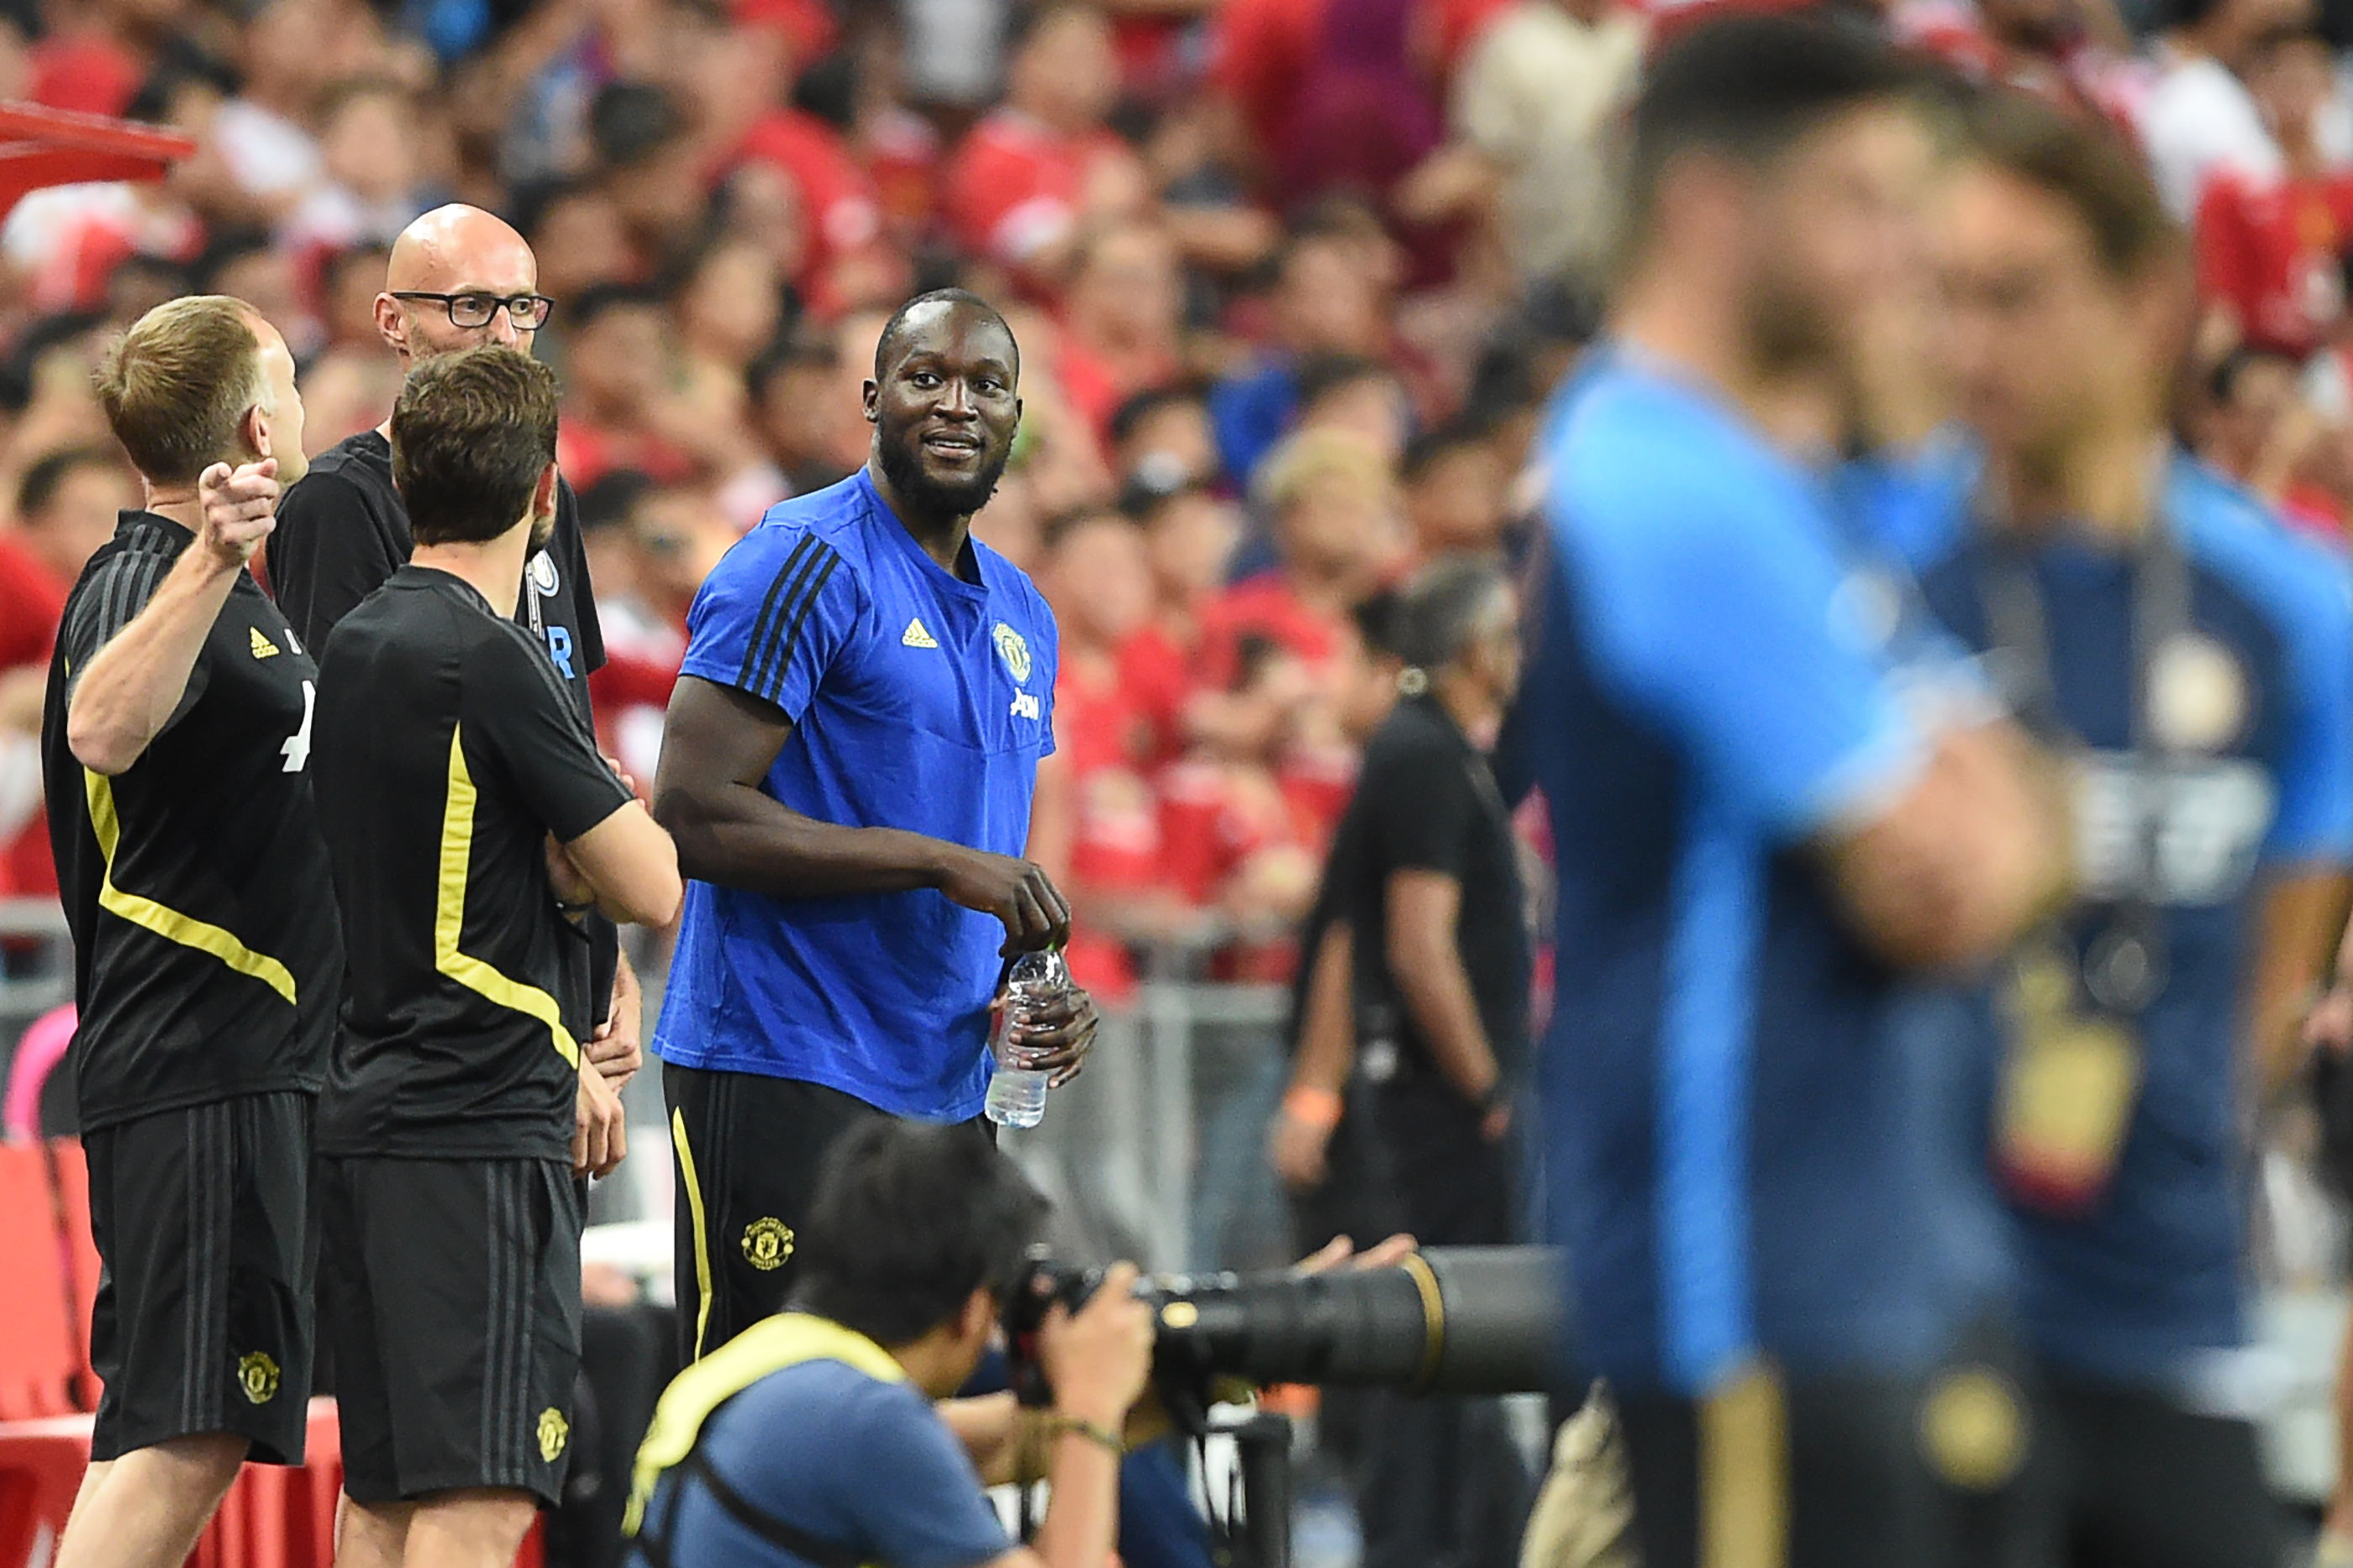 Manchester United's Romelu Lukaku (C) is seen with his team before the International Champions Cup football match between Manchester United and Inter Milan in Singapore on July 20, 2019. (Photo by Roslan RAHMAN / AFP)        (Photo credit should read ROSLAN RAHMAN/AFP/Getty Images)